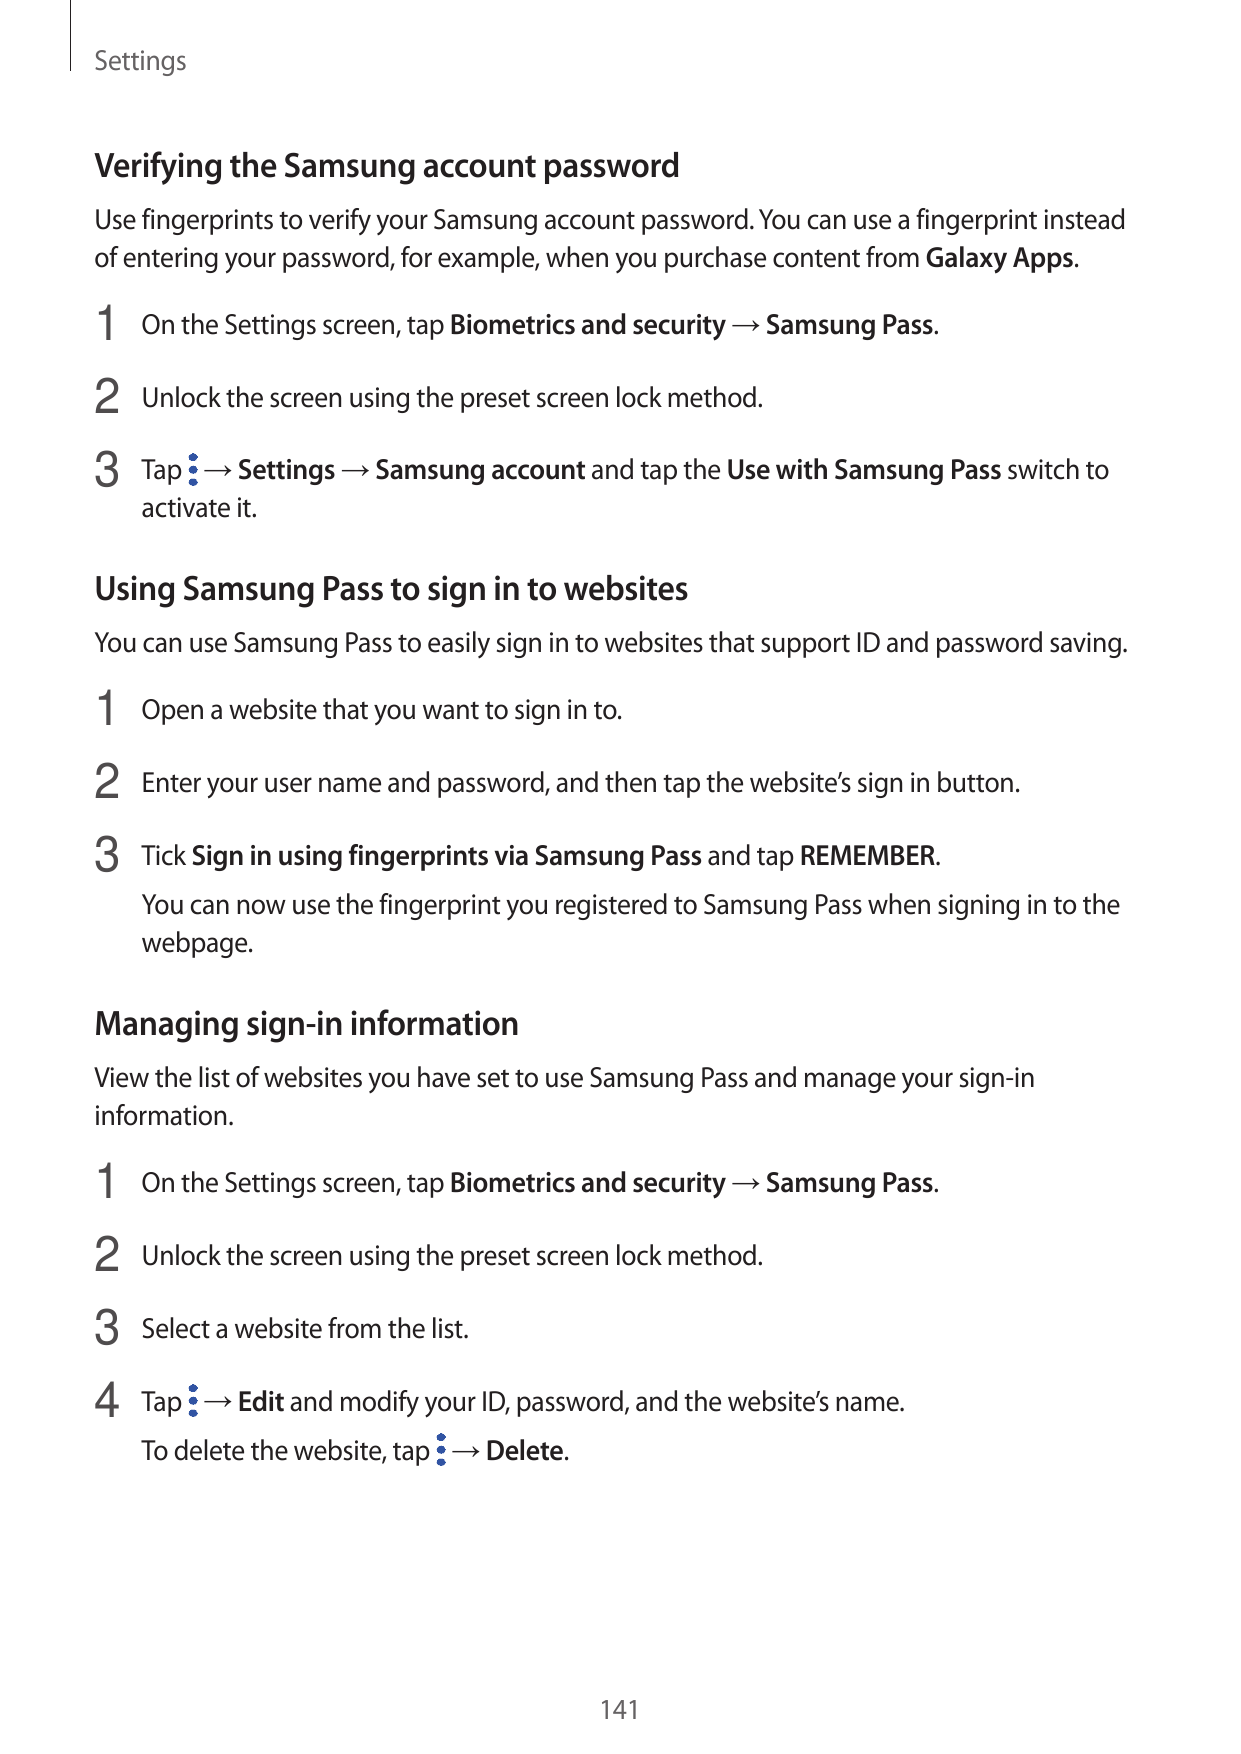 SettingsVerifying the Samsung account passwordUse fingerprints to verify your Samsung account password. You can use a fingerprin